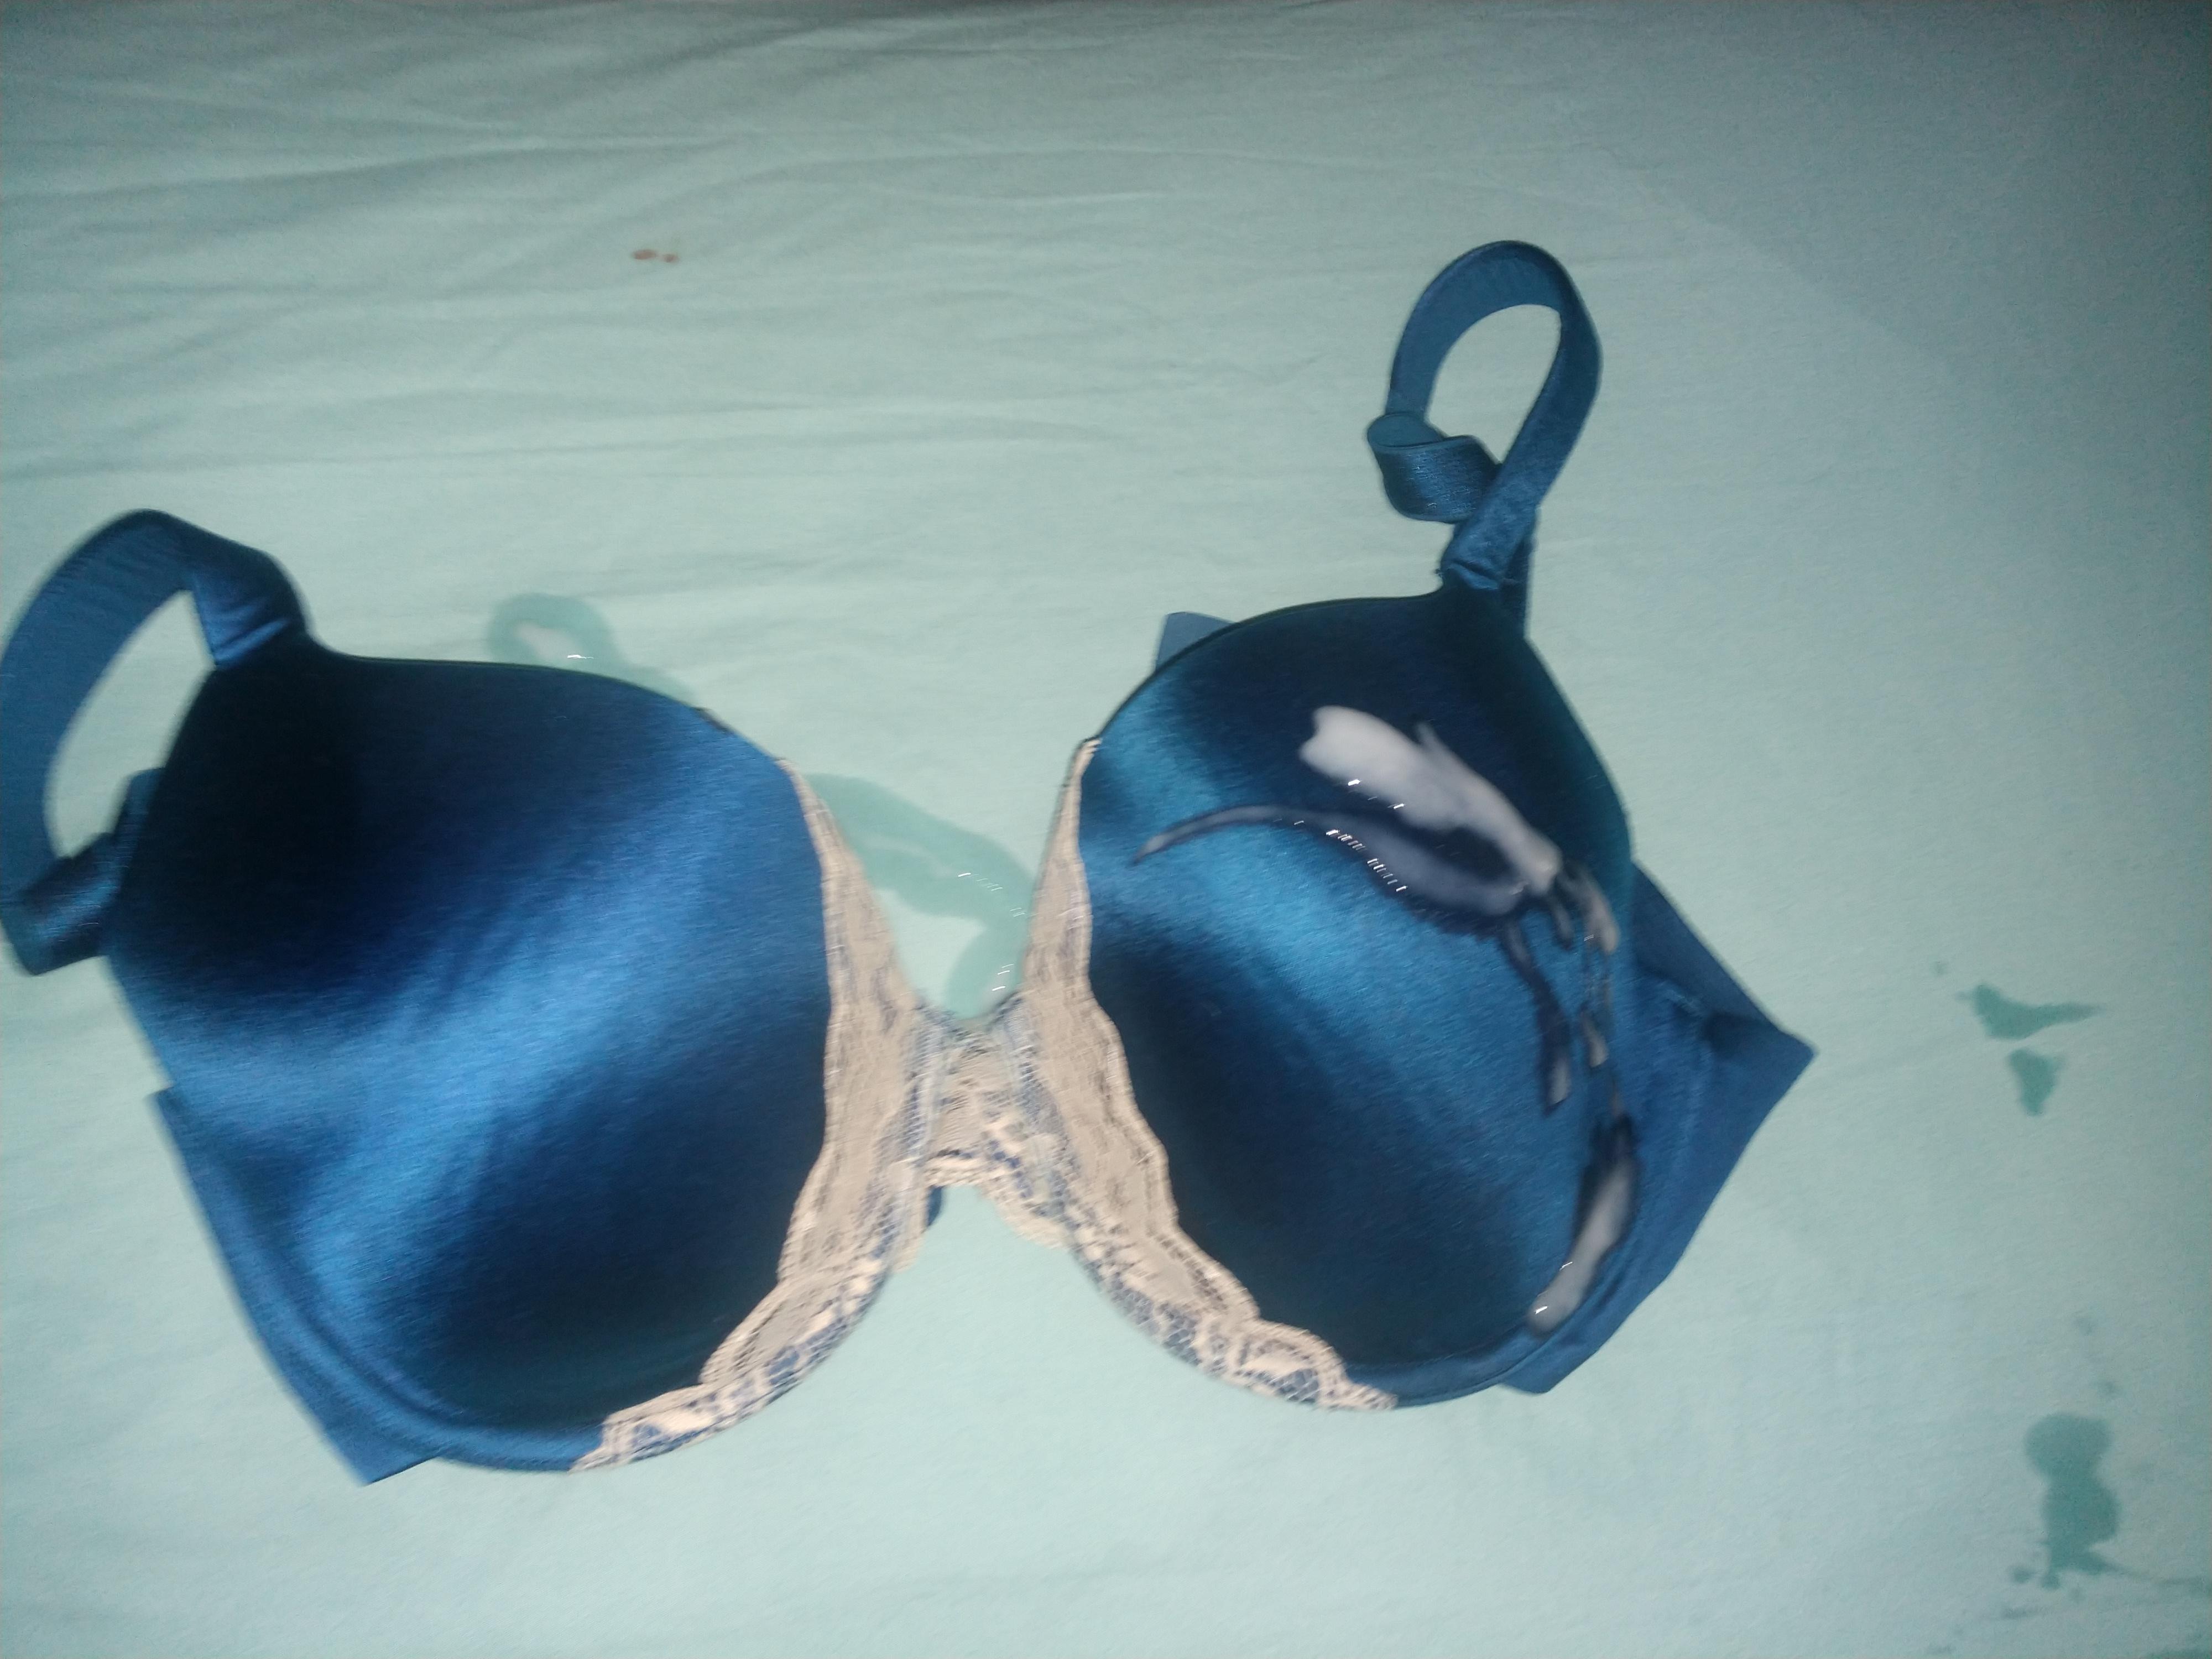 Soma, 36D. Wife's absolutely adore this color, on and off of her